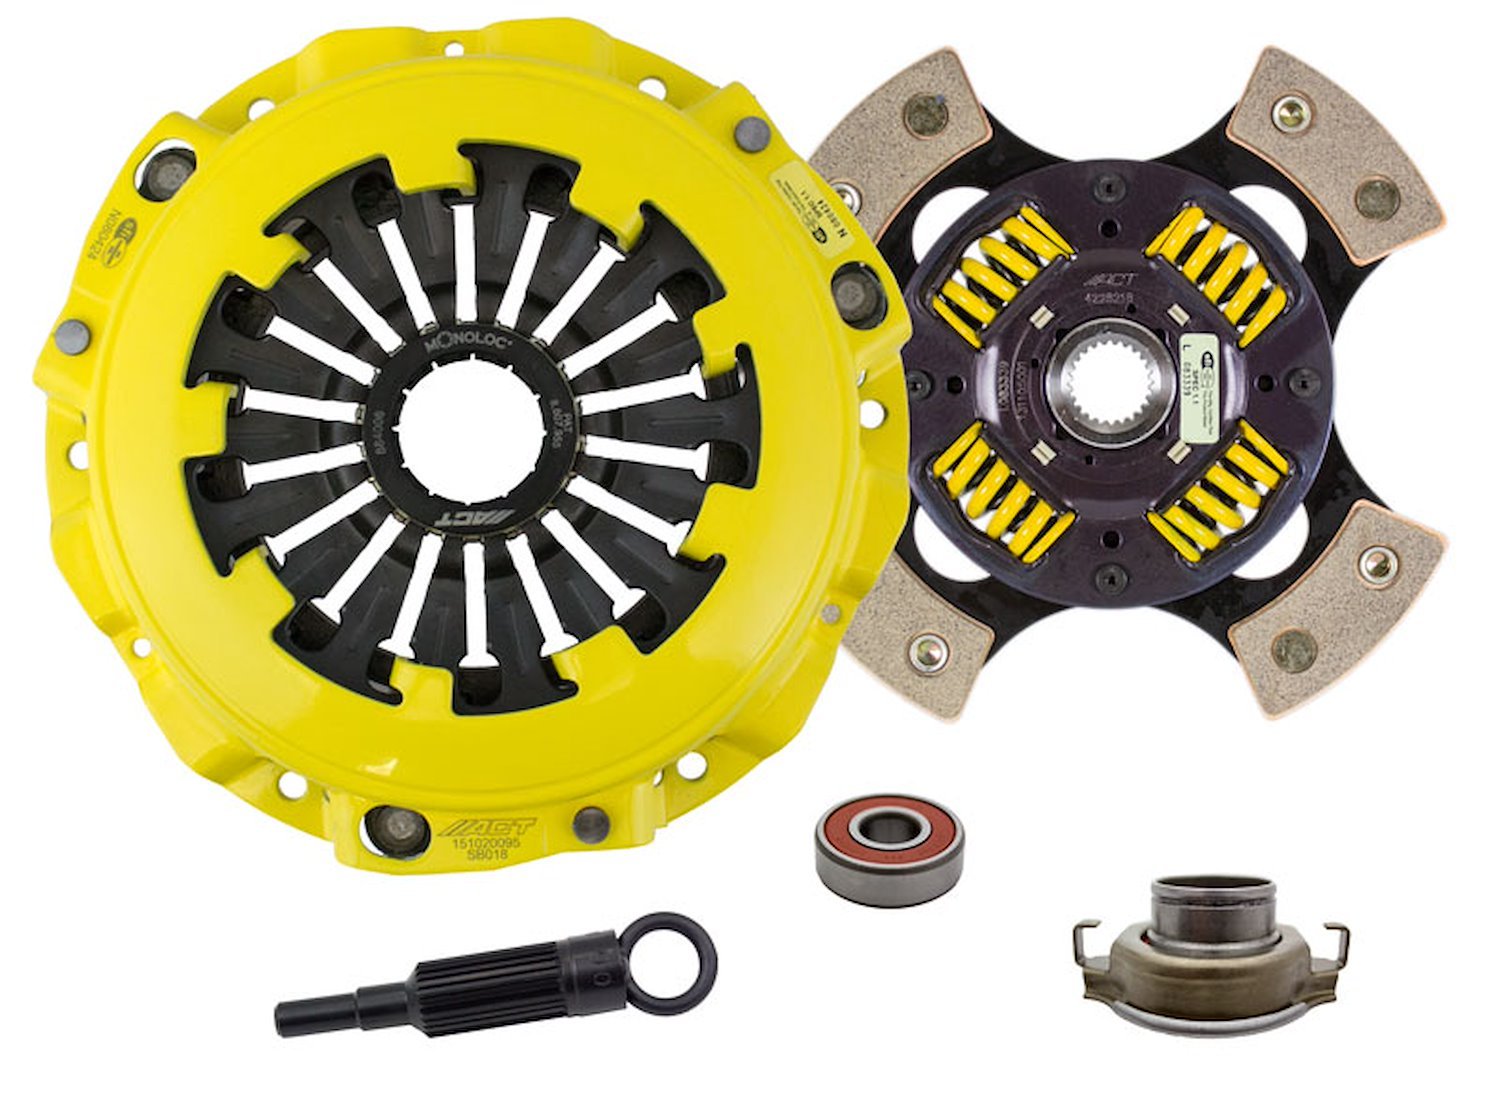 HD-M/Race Sprung 4-Pad Transmission Clutch Kit Fits Select Multiple Makes/Models